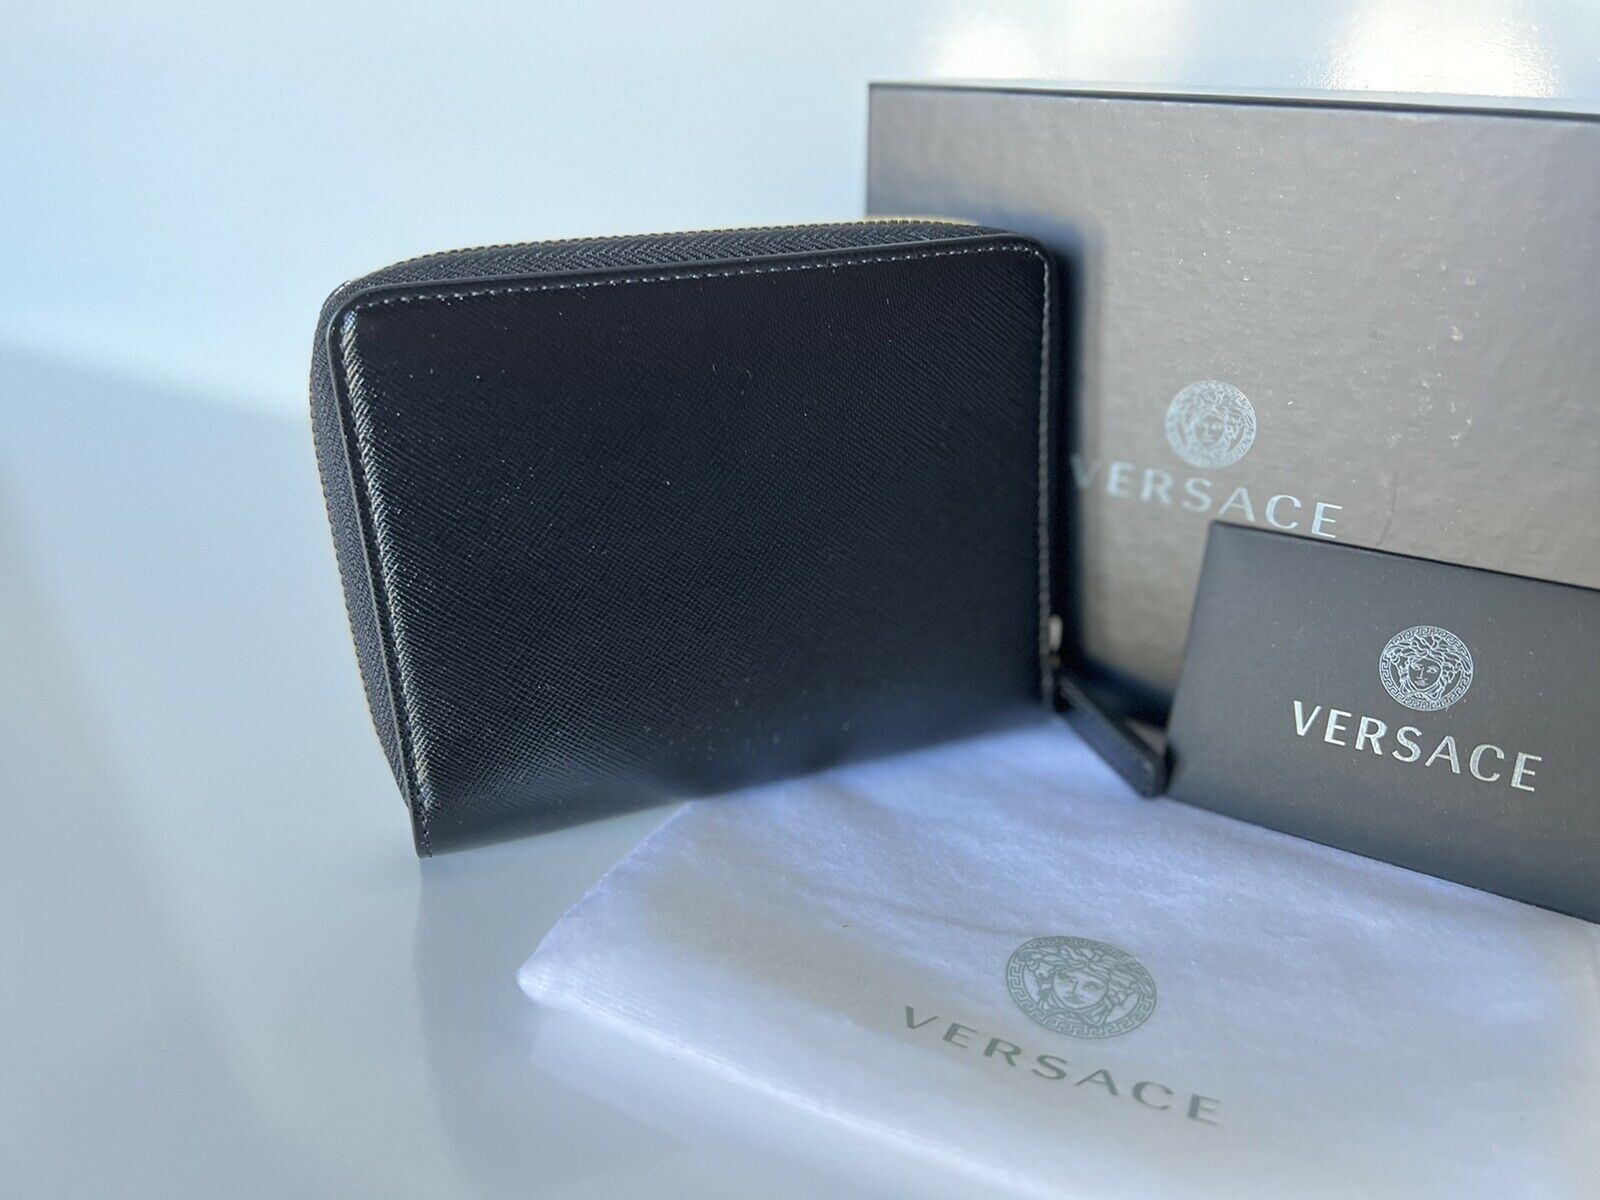 NWT Versace Black Calf Leather Medium Zipper Wallet Made in Italy 593